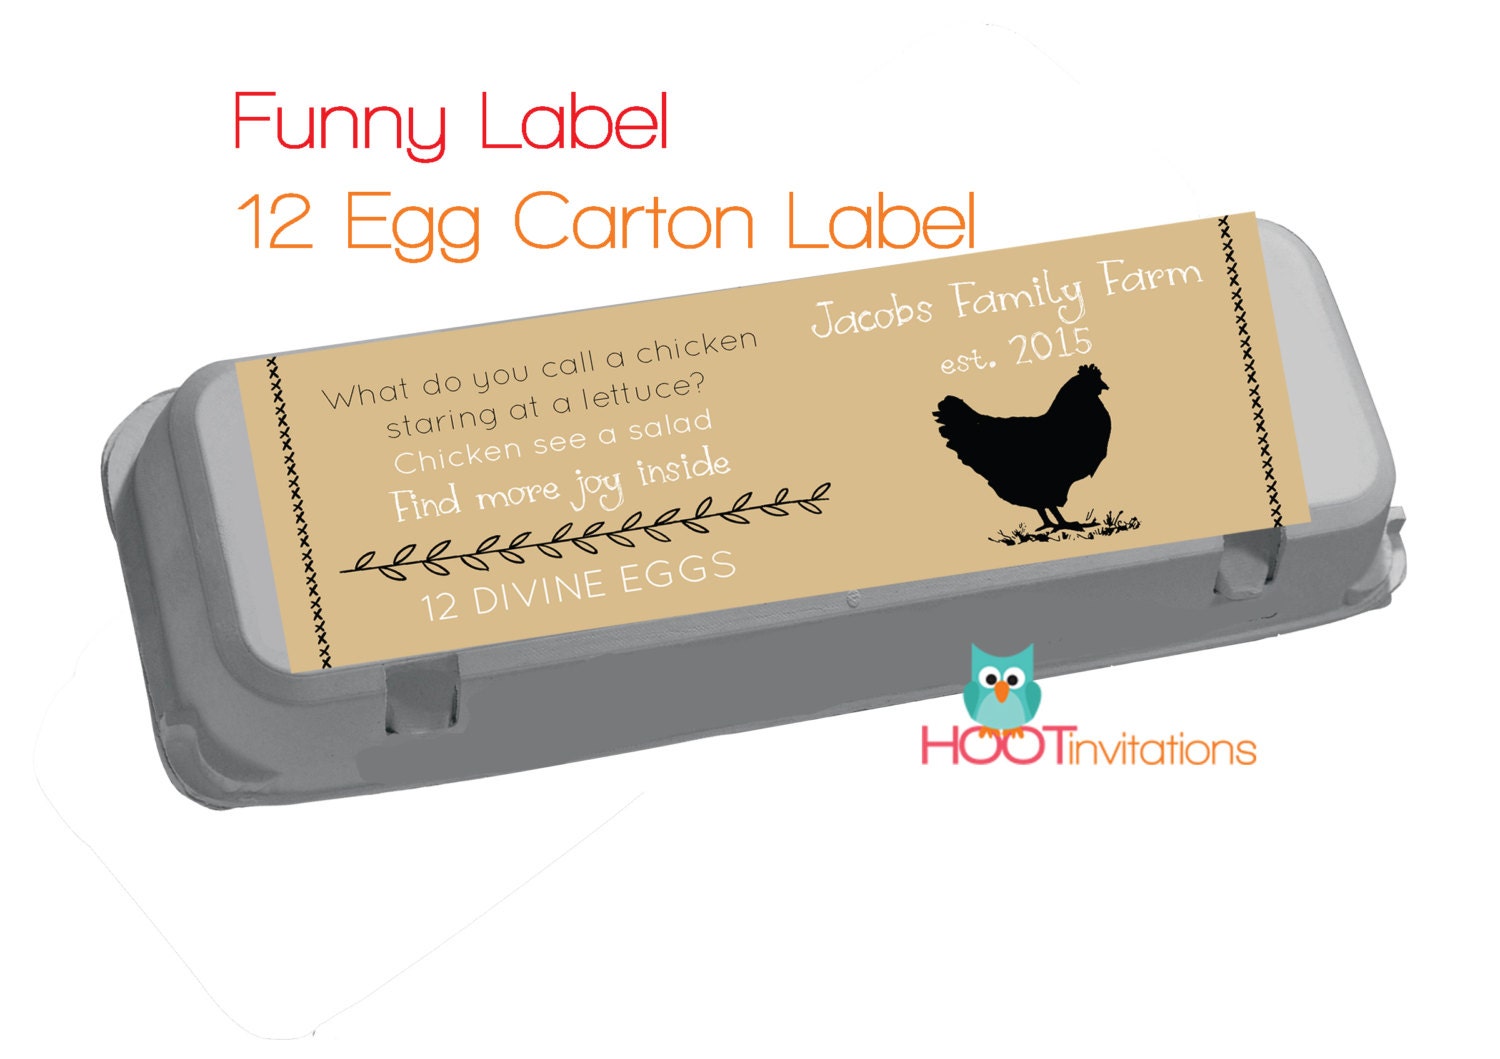 Funny Egg Carton Labels to print at home one dozen 12 egg